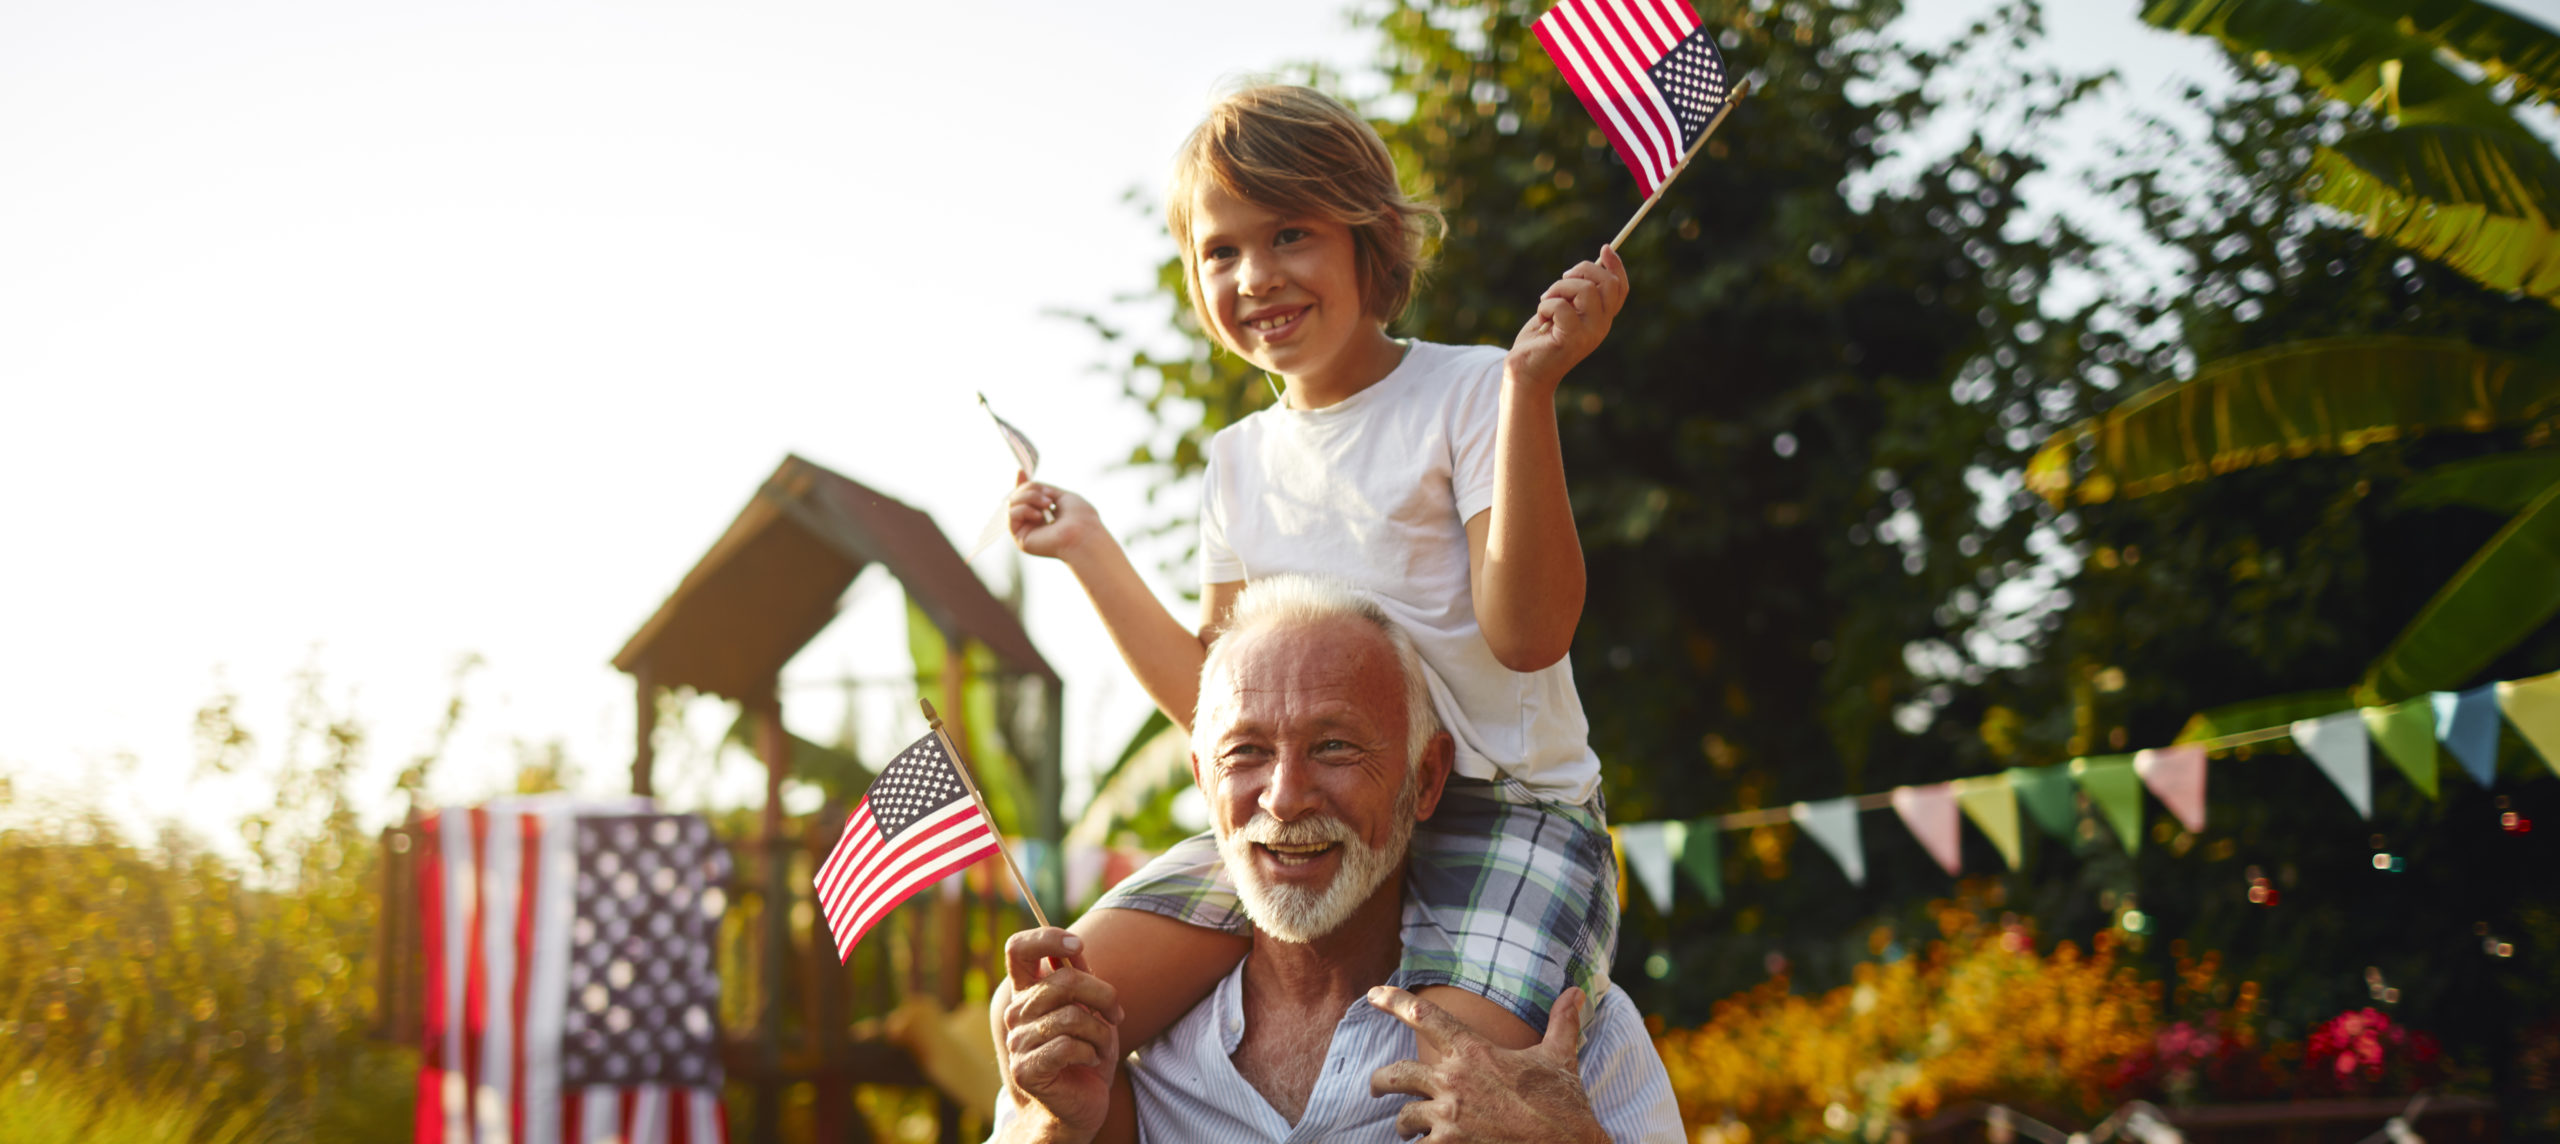 4th Of July - Grandfather and grandson